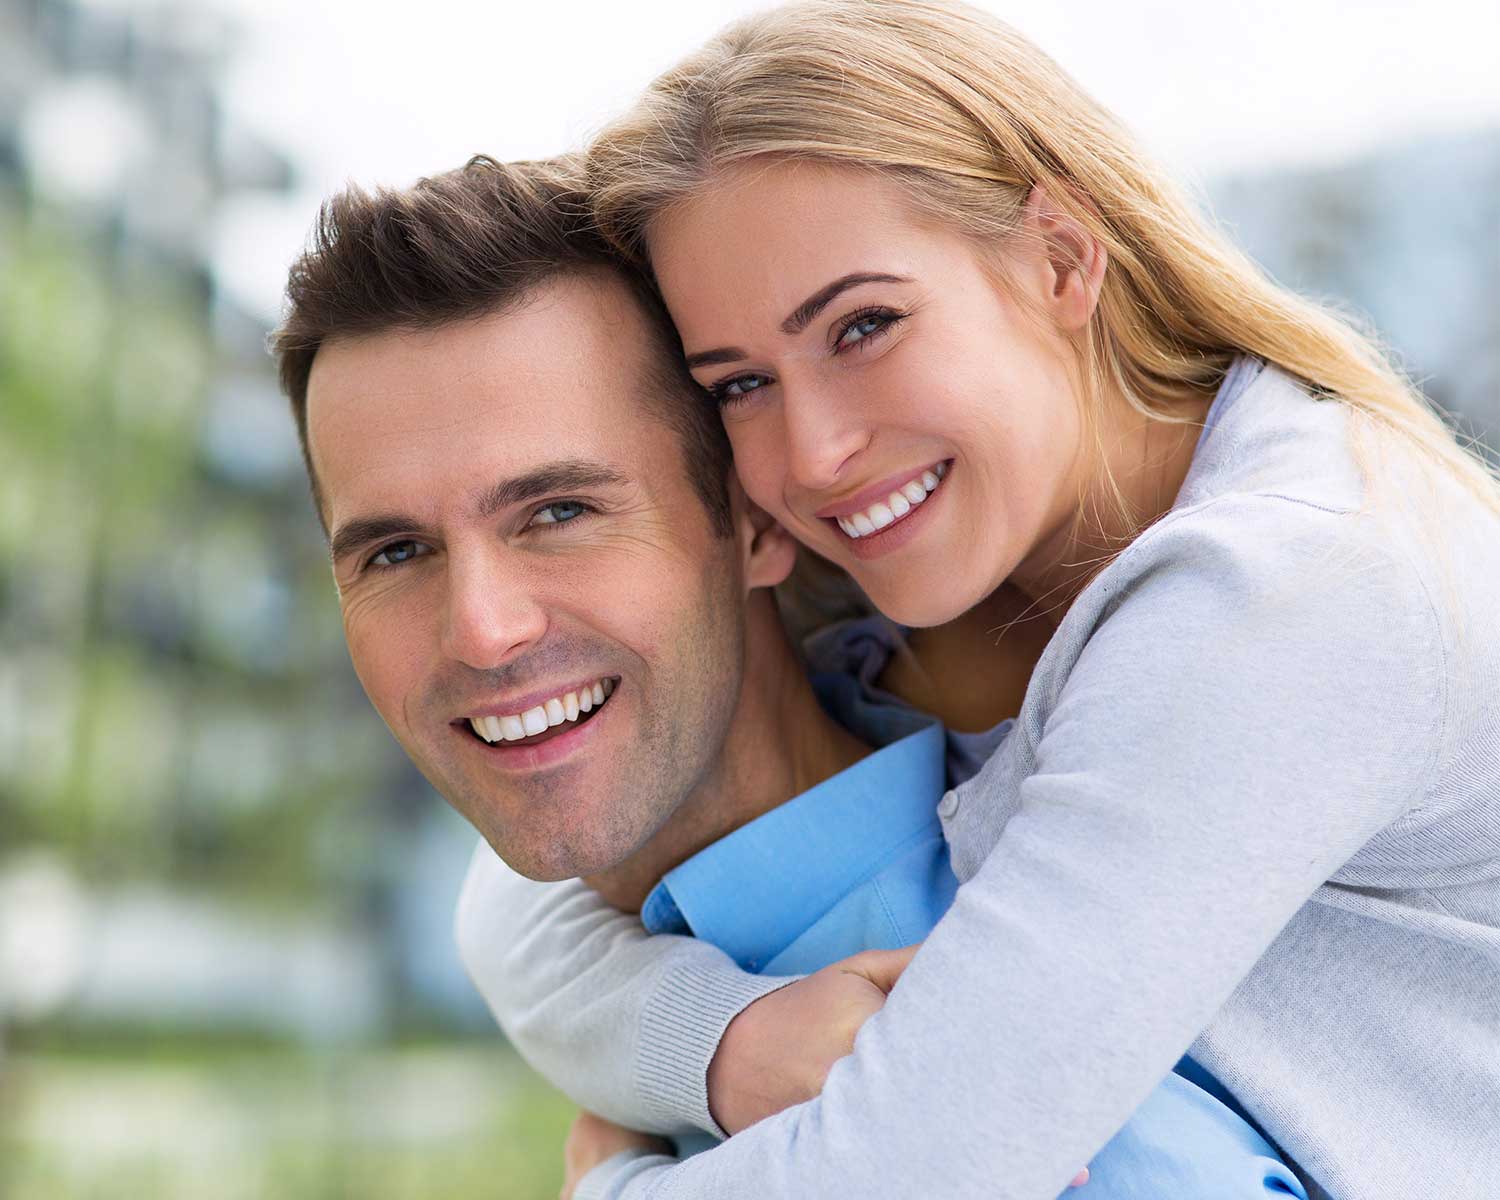 man and woman smiling together